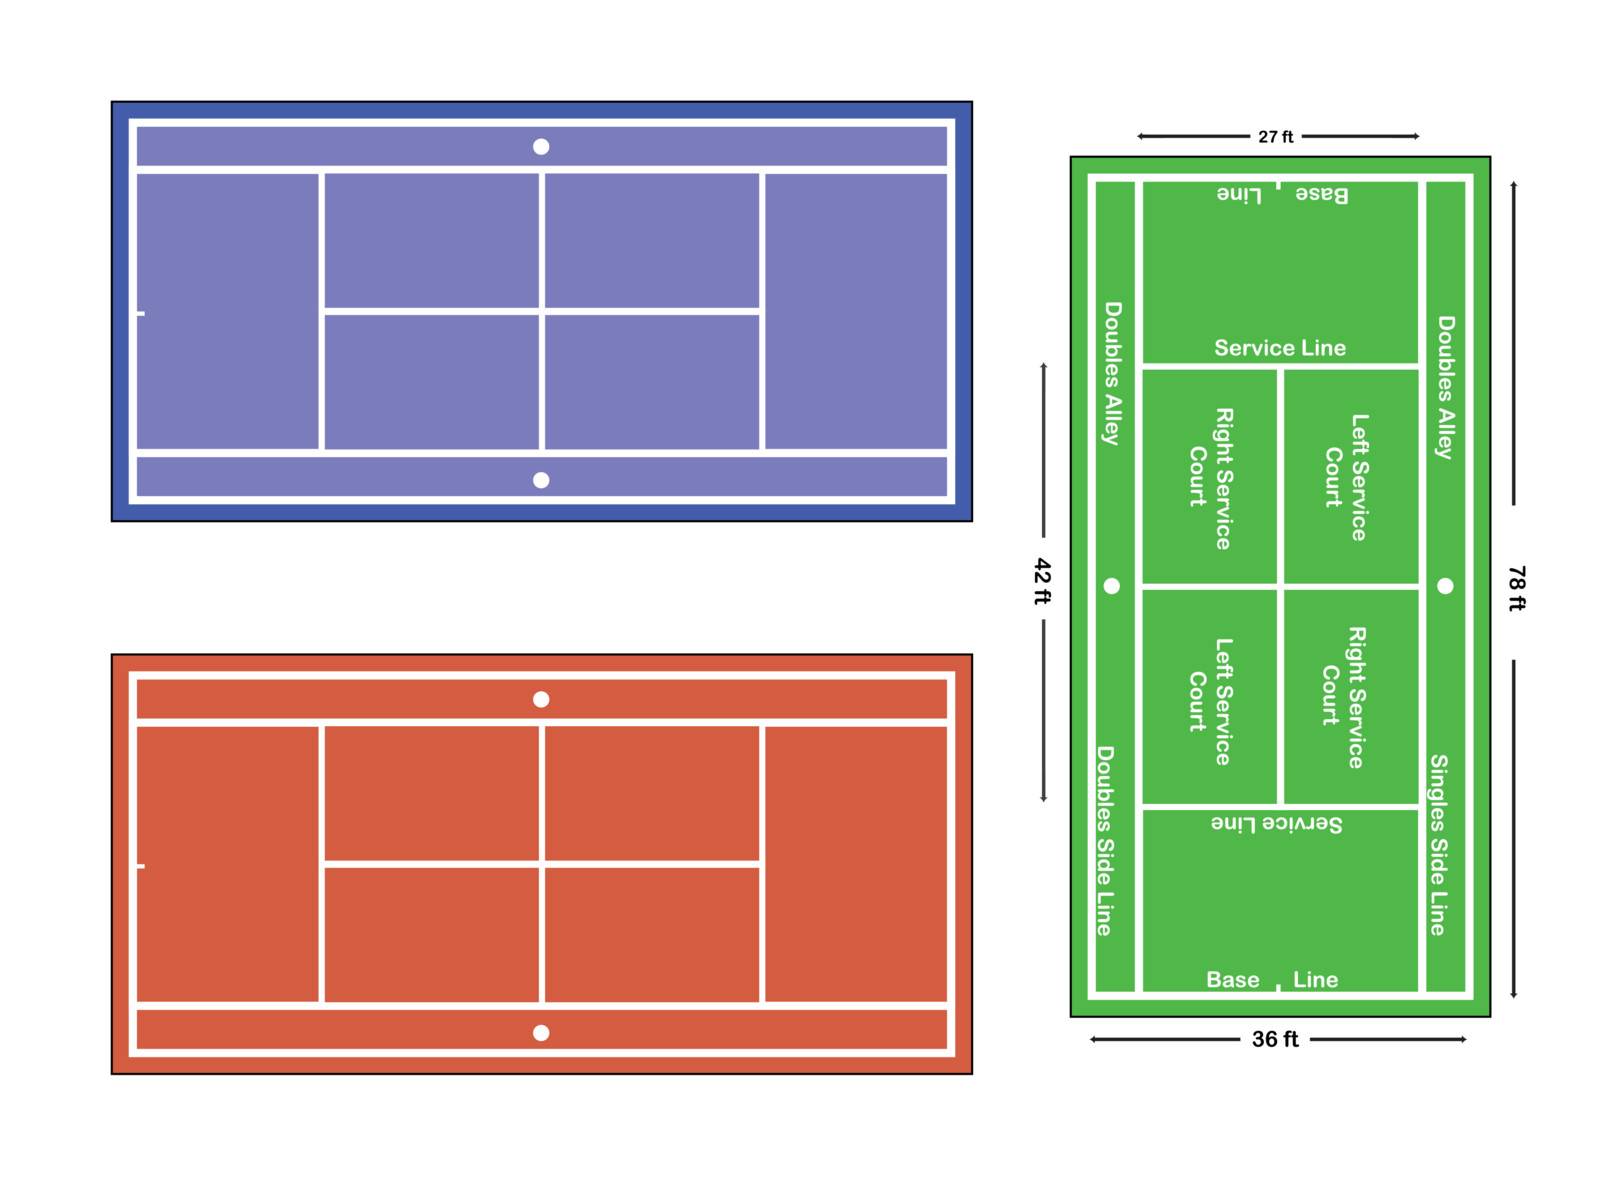 An exact scale vector illustration of a tennis court with markings and dimensions, depicting grass court, hard court and clay court.